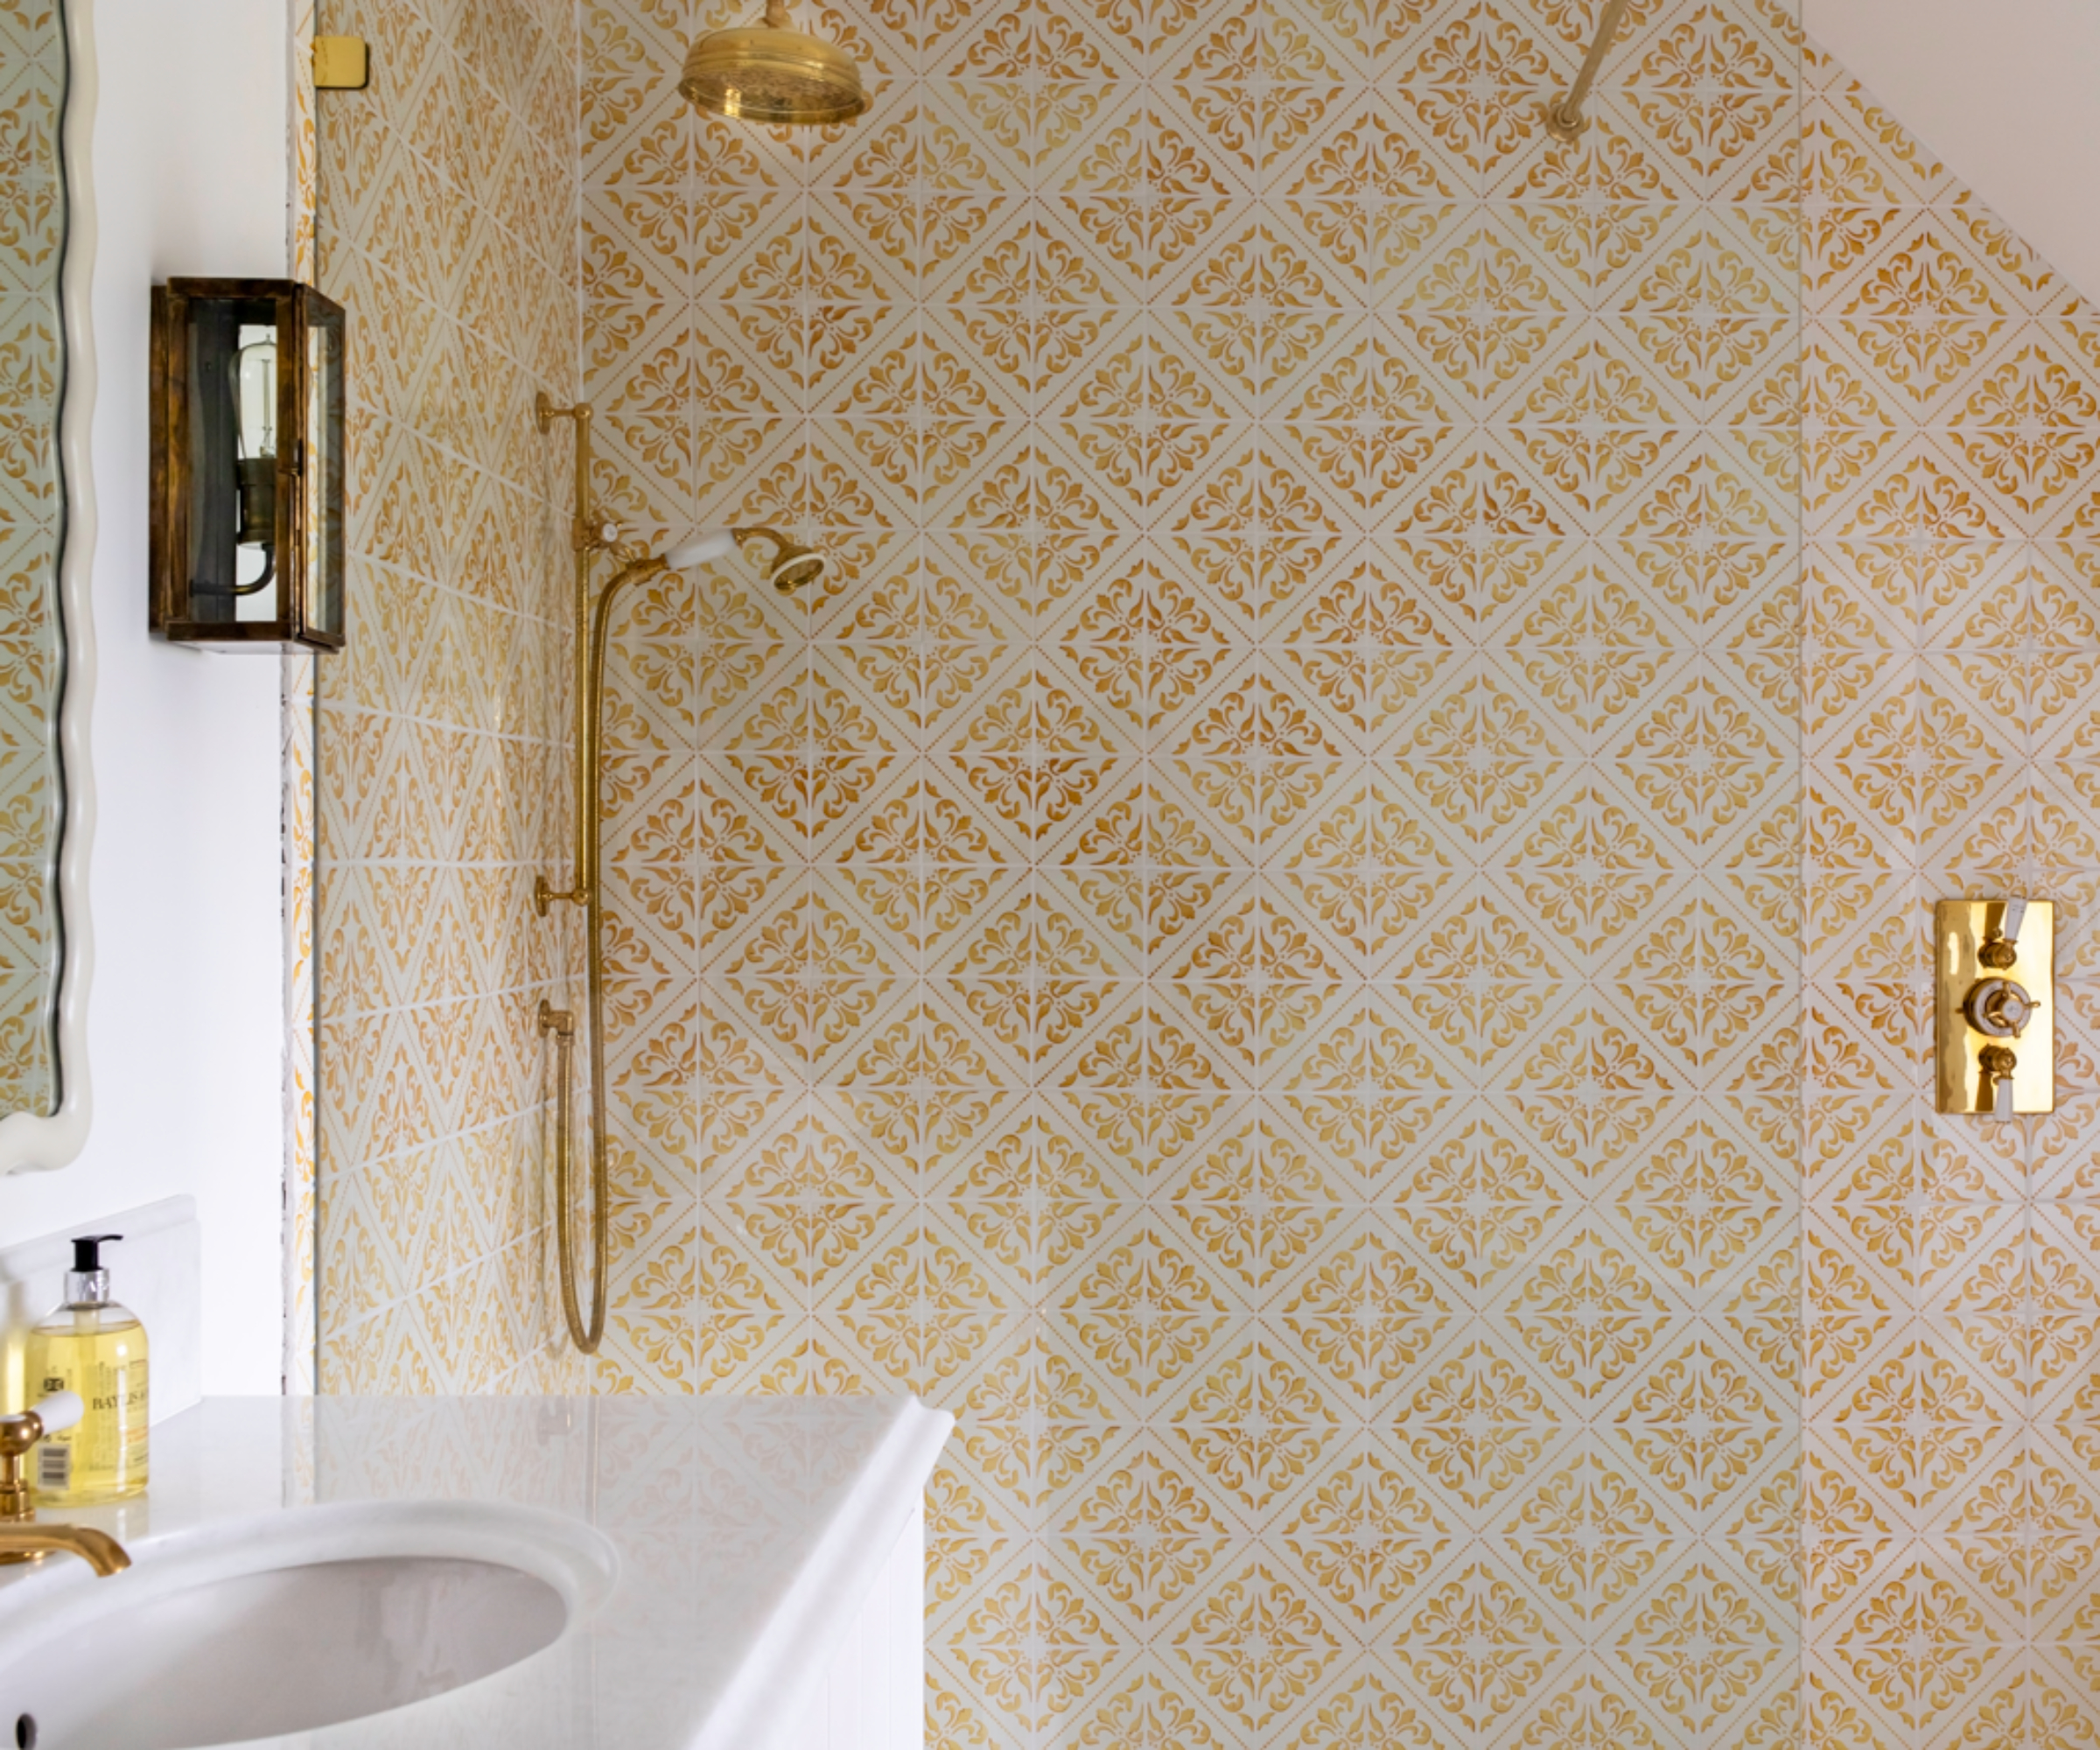 yellow and white patterned tiles in shower area with gold fittings